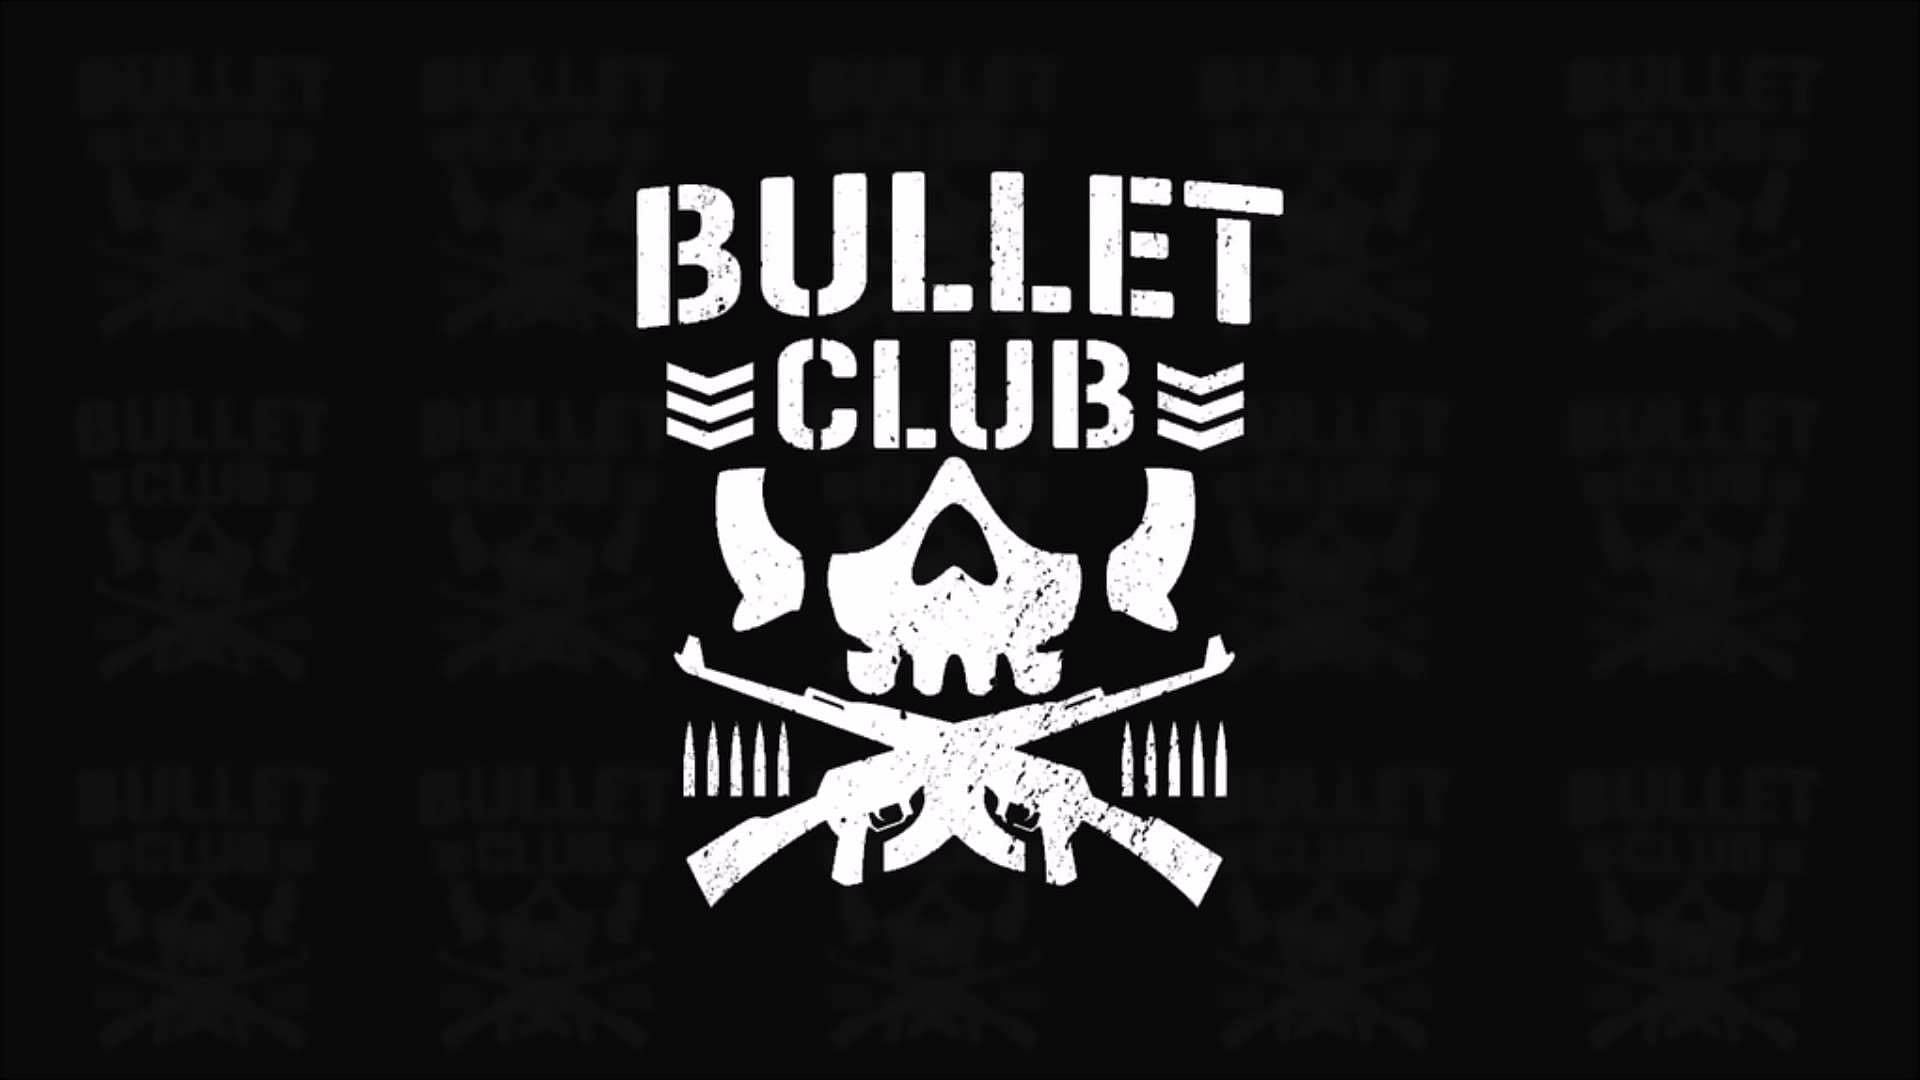 WWE has teased having The Bullet Club for years.